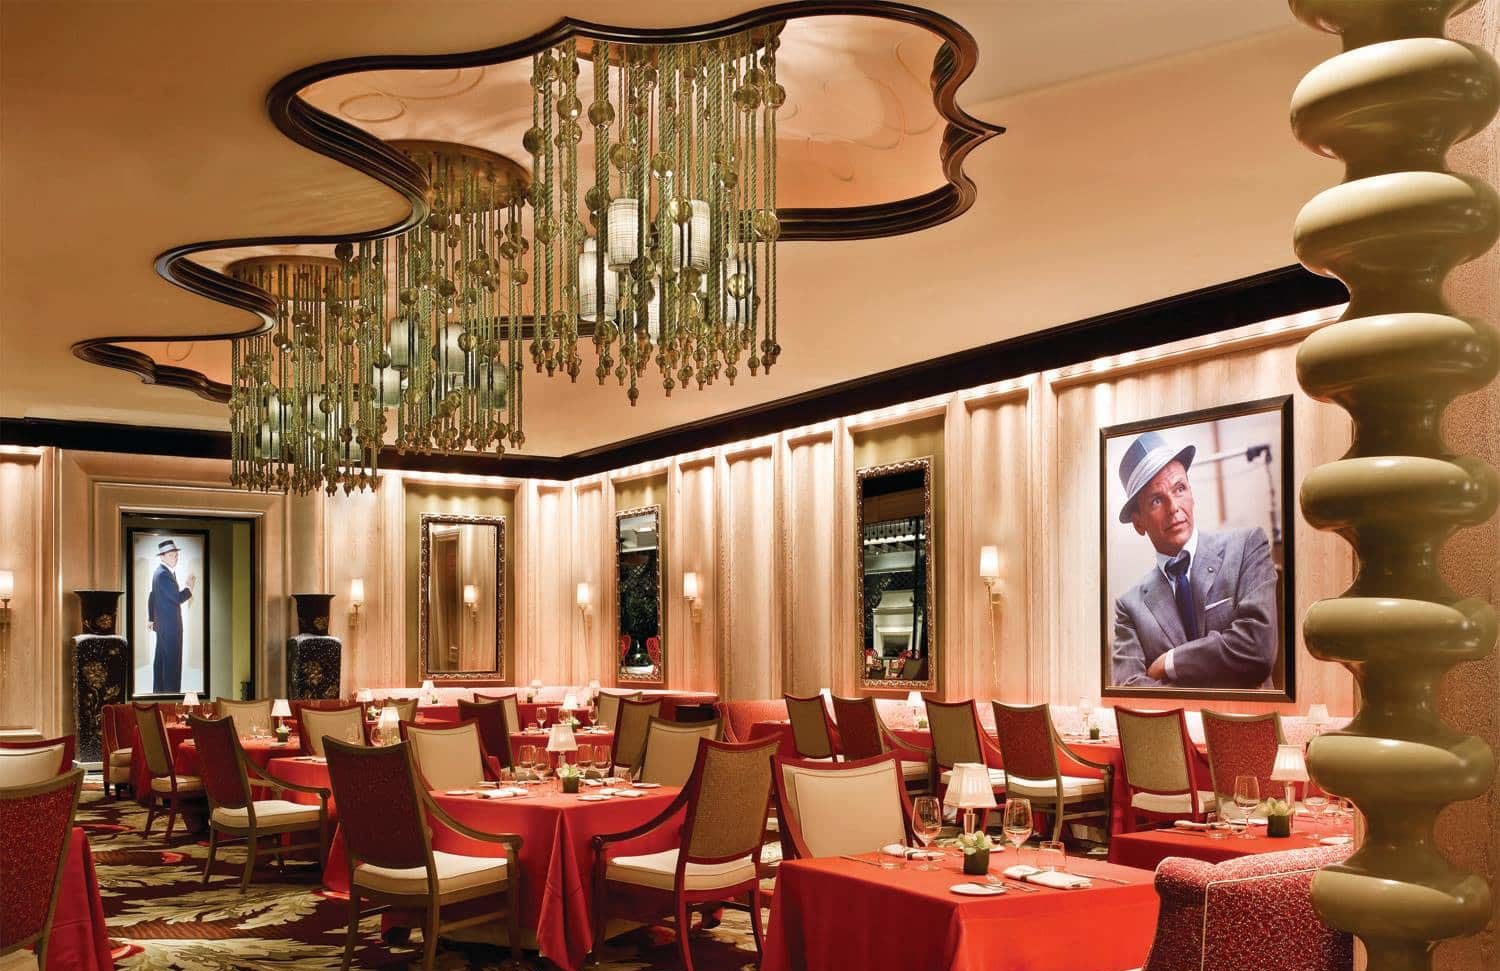 The luxurious red and gold interior of Sinatra with a photo of Sinatra on the wall. 